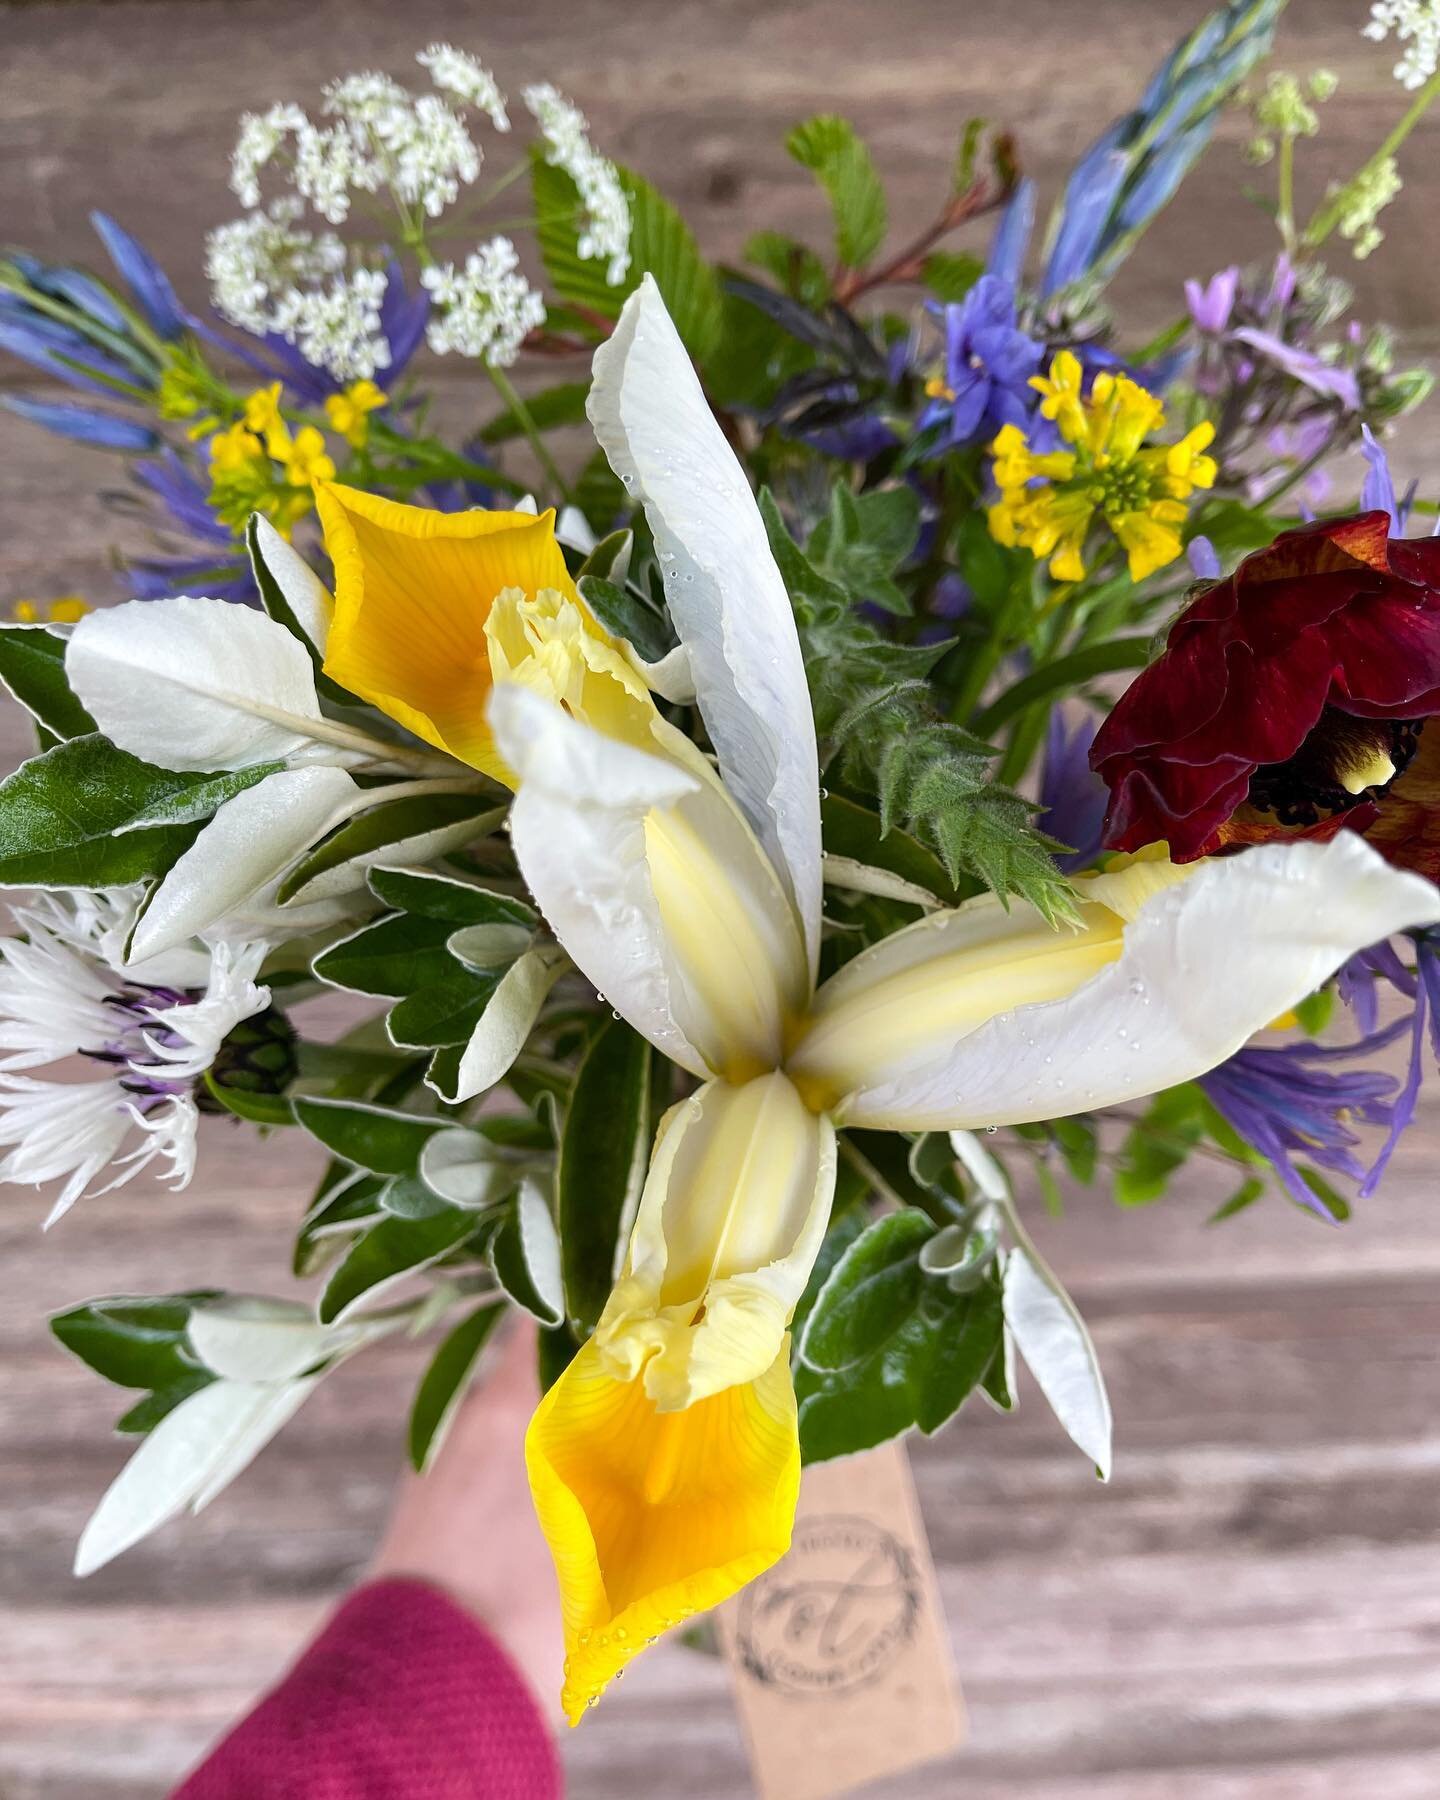 🌱 Iris 🌱 

Beautiful irises are beginning to bloom in greater numbers now. You can find one or two tucked into today&rsquo;s jam jar posies up at the honesty stand or your bouquet orders.

Every time I see an Iris, I can&rsquo;t help but laugh and 